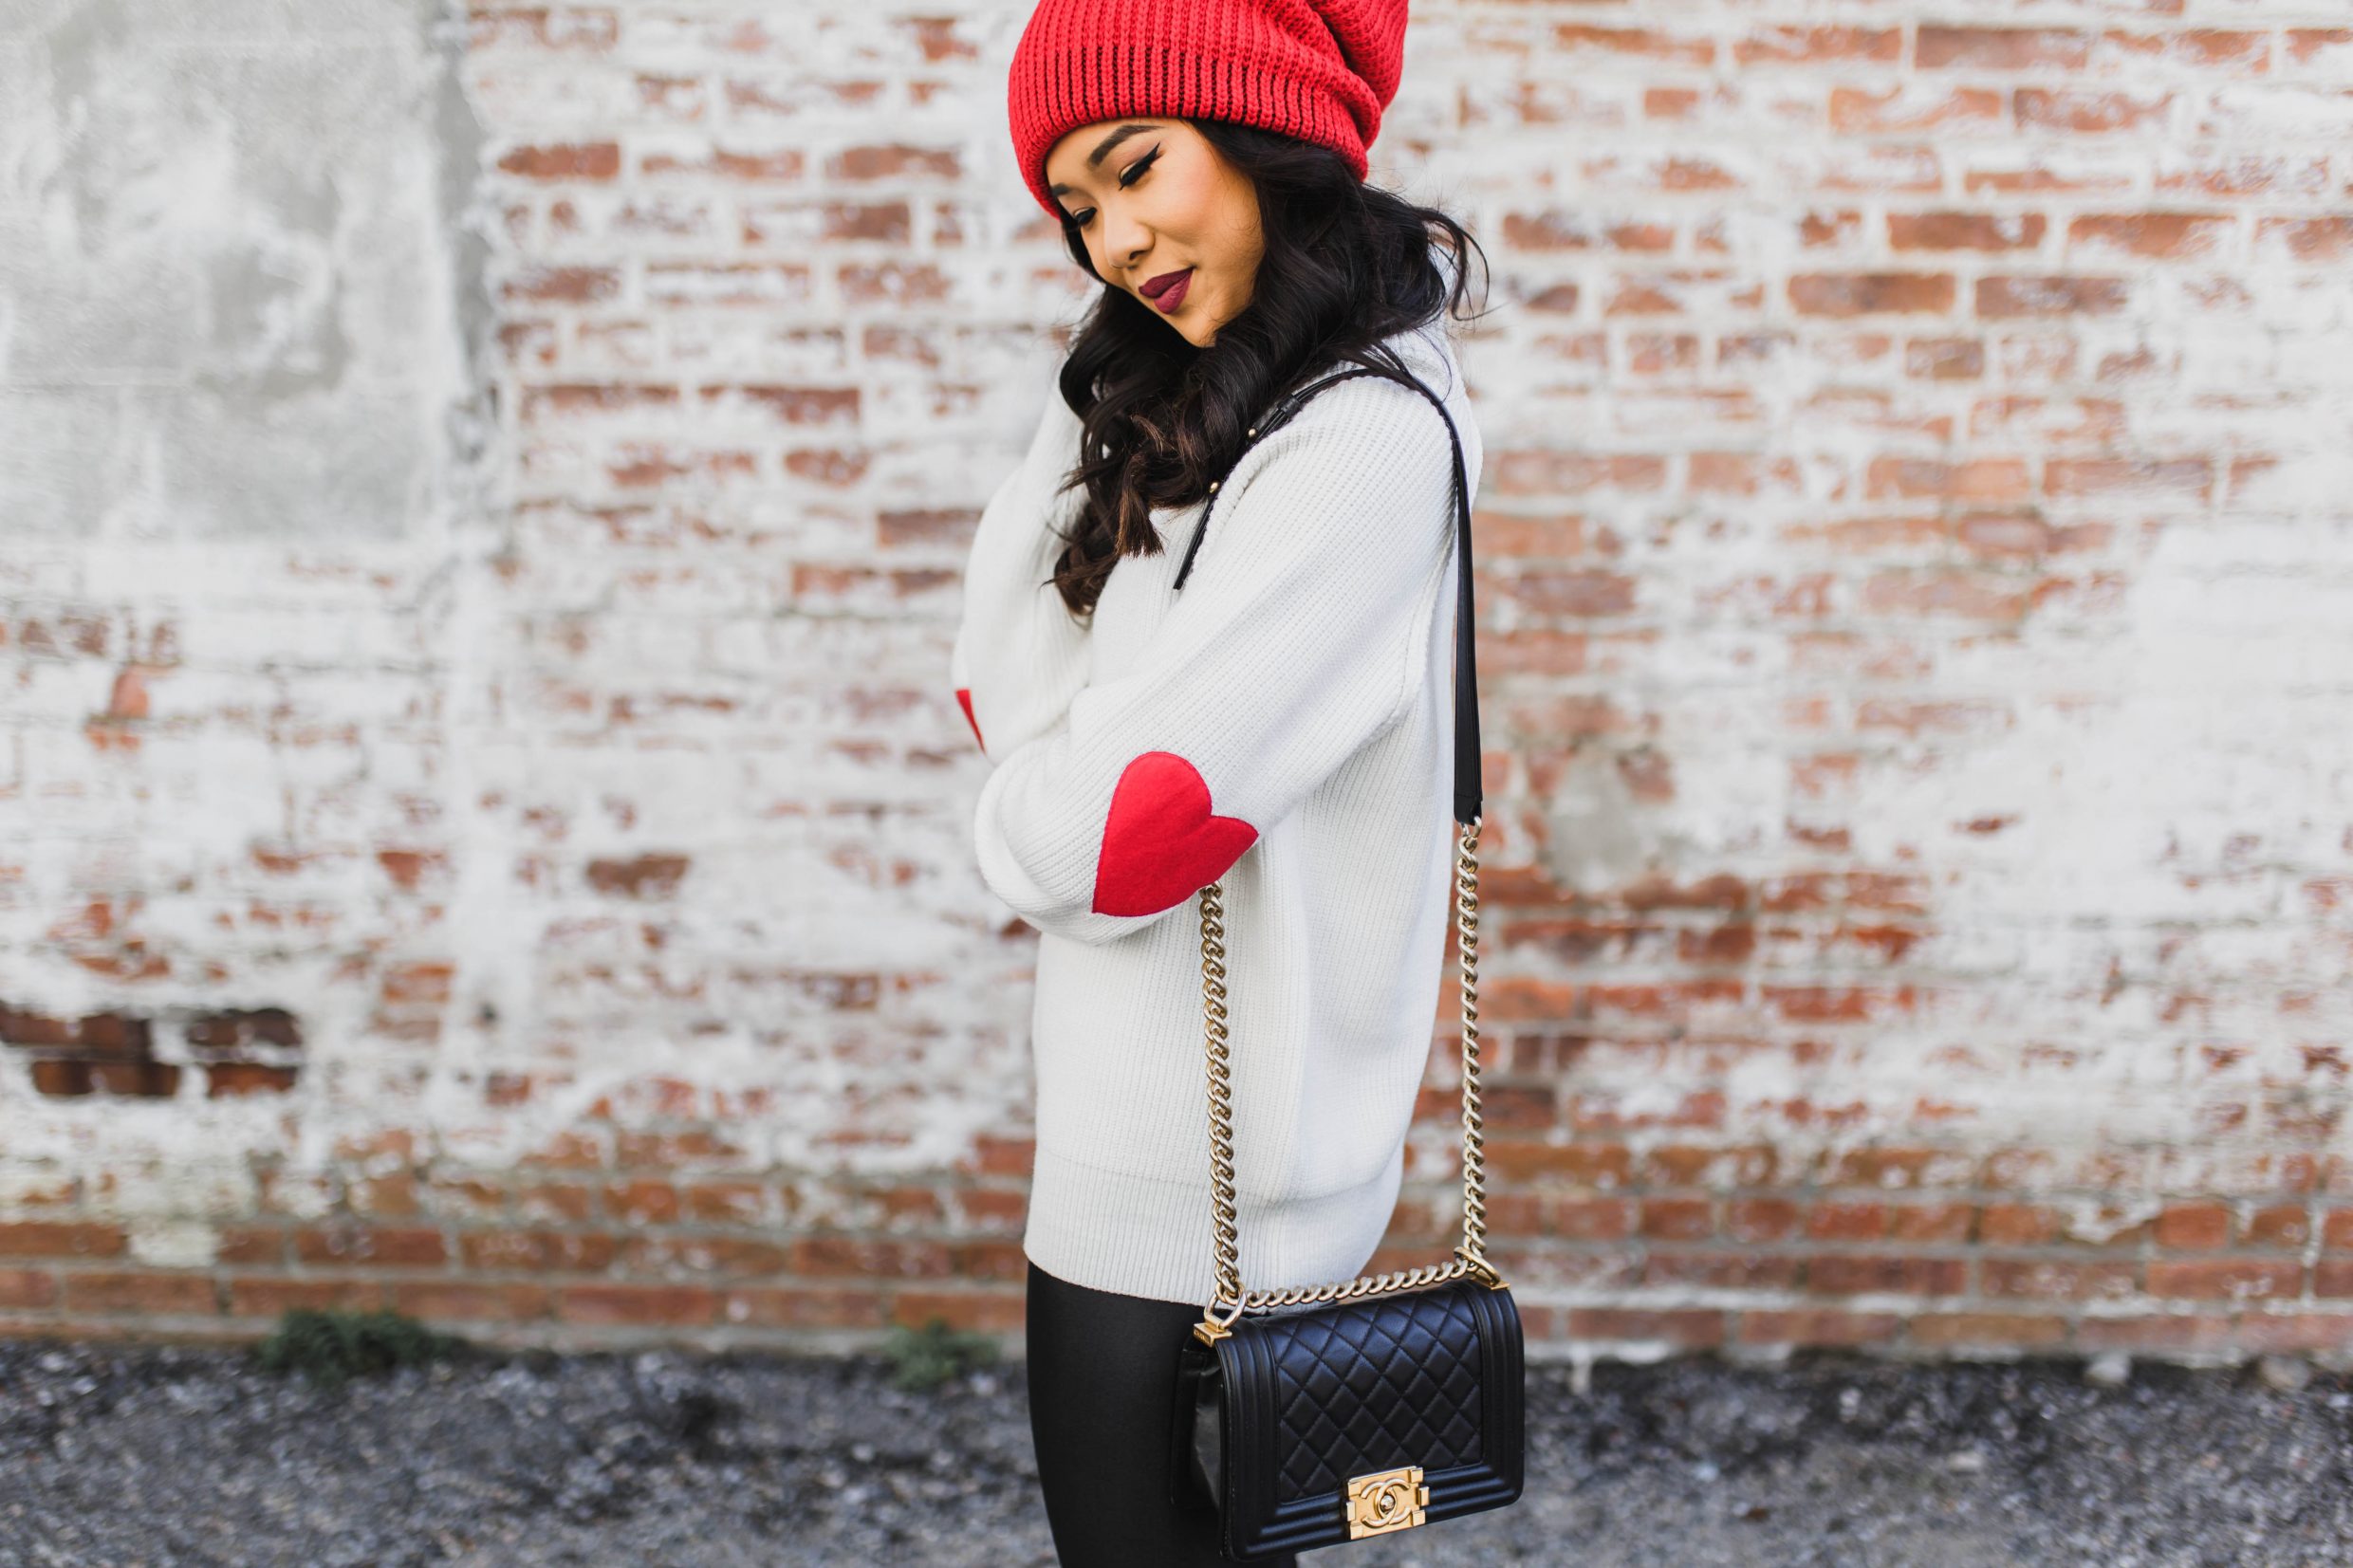 Heart Patch Sweater with black leggings and conquest winter boots